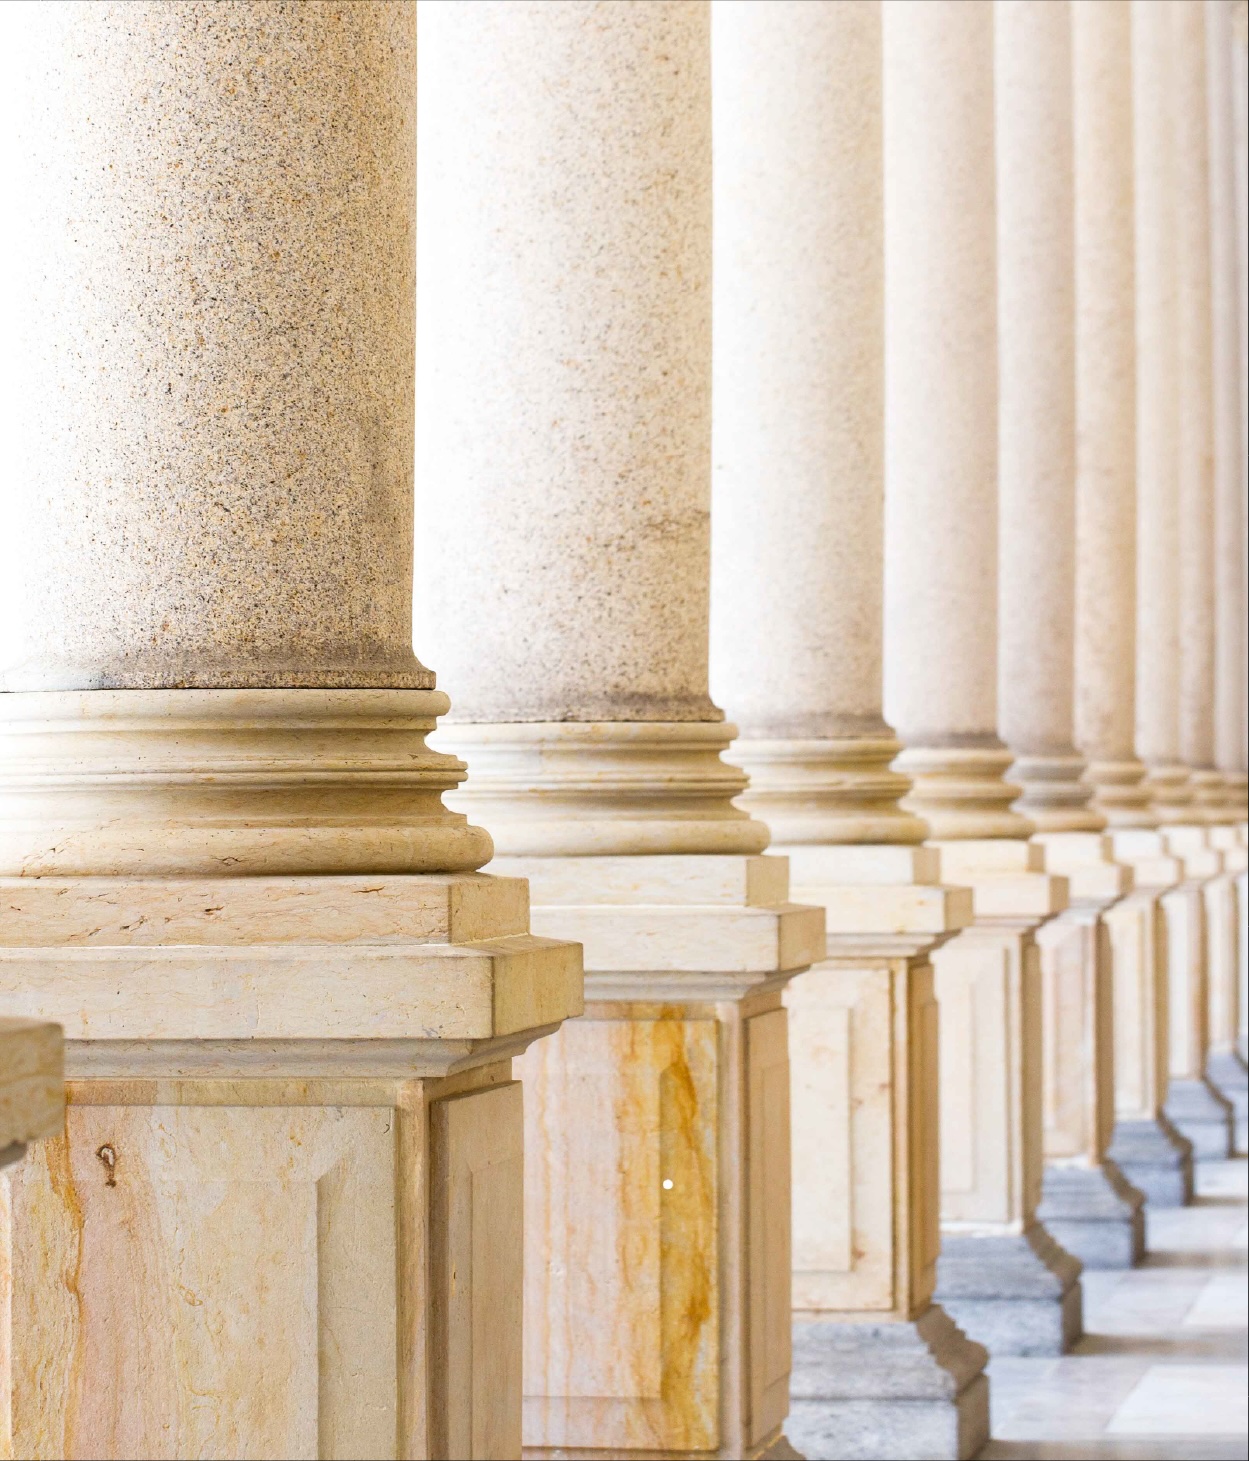 Neo-classical columns in a government building